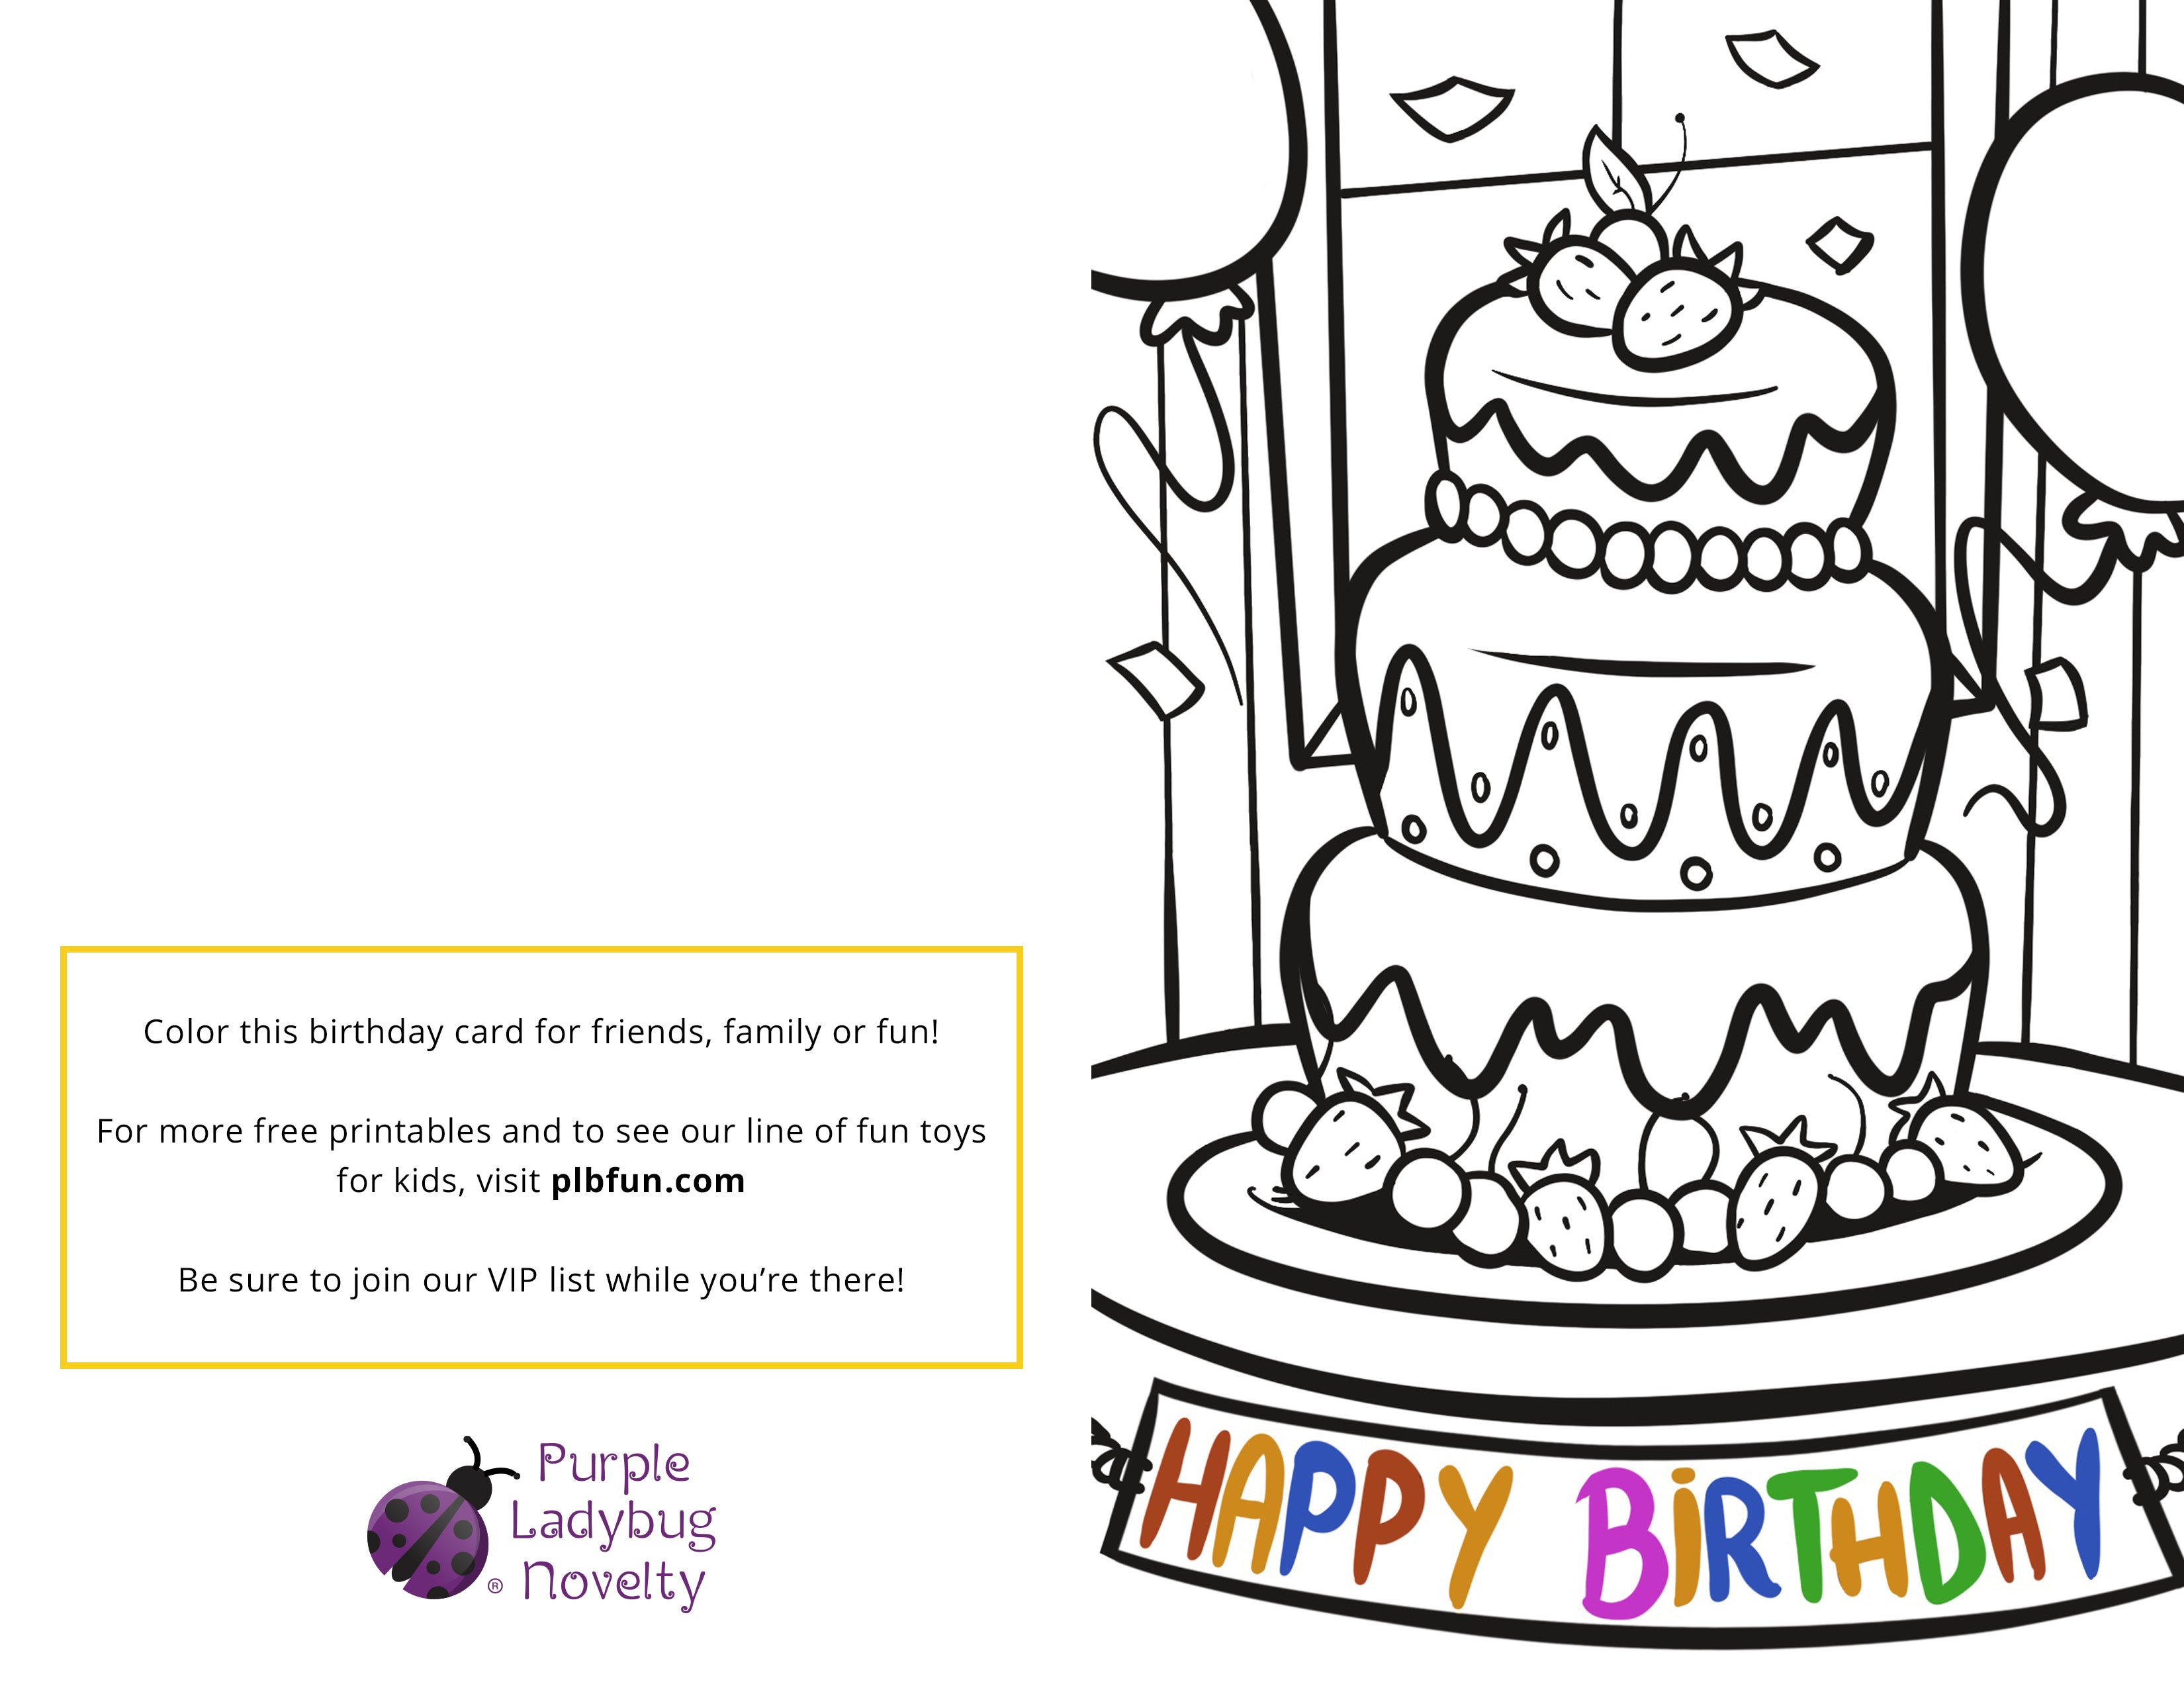 Animals - 31+ Free Printable Birthday Cards To Color  for Adults